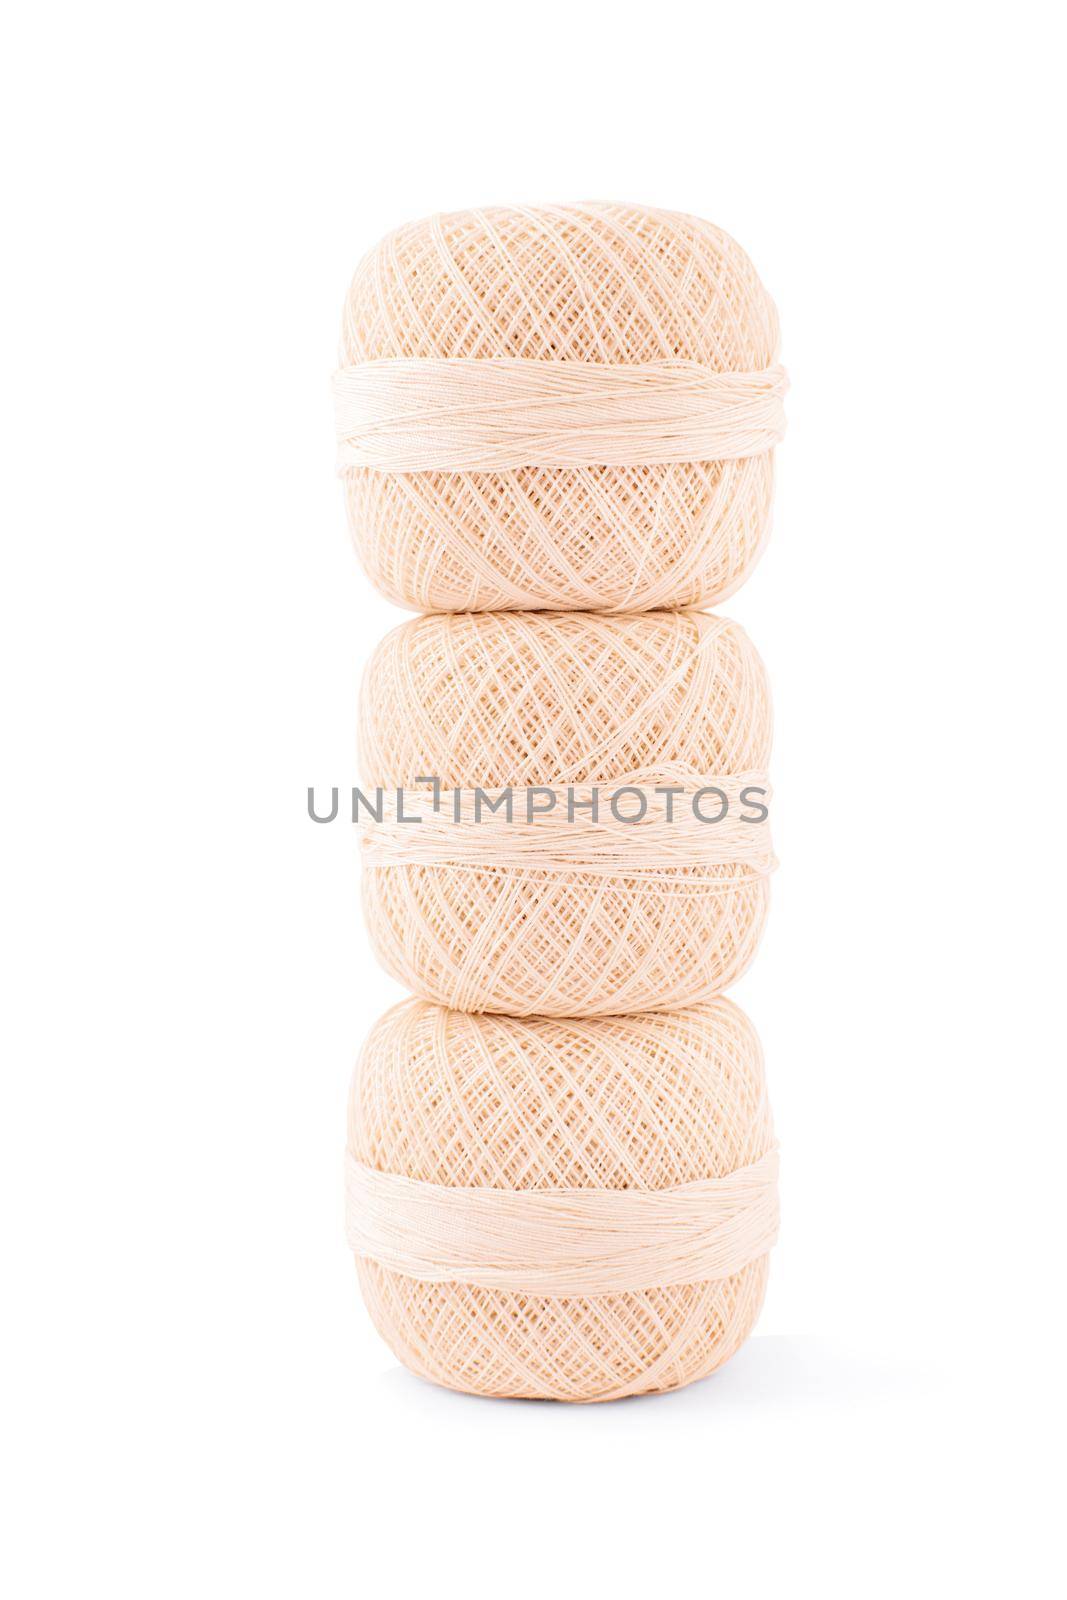 Close up shot of three spools of embroidery thread on top of each other, isolated on white background.